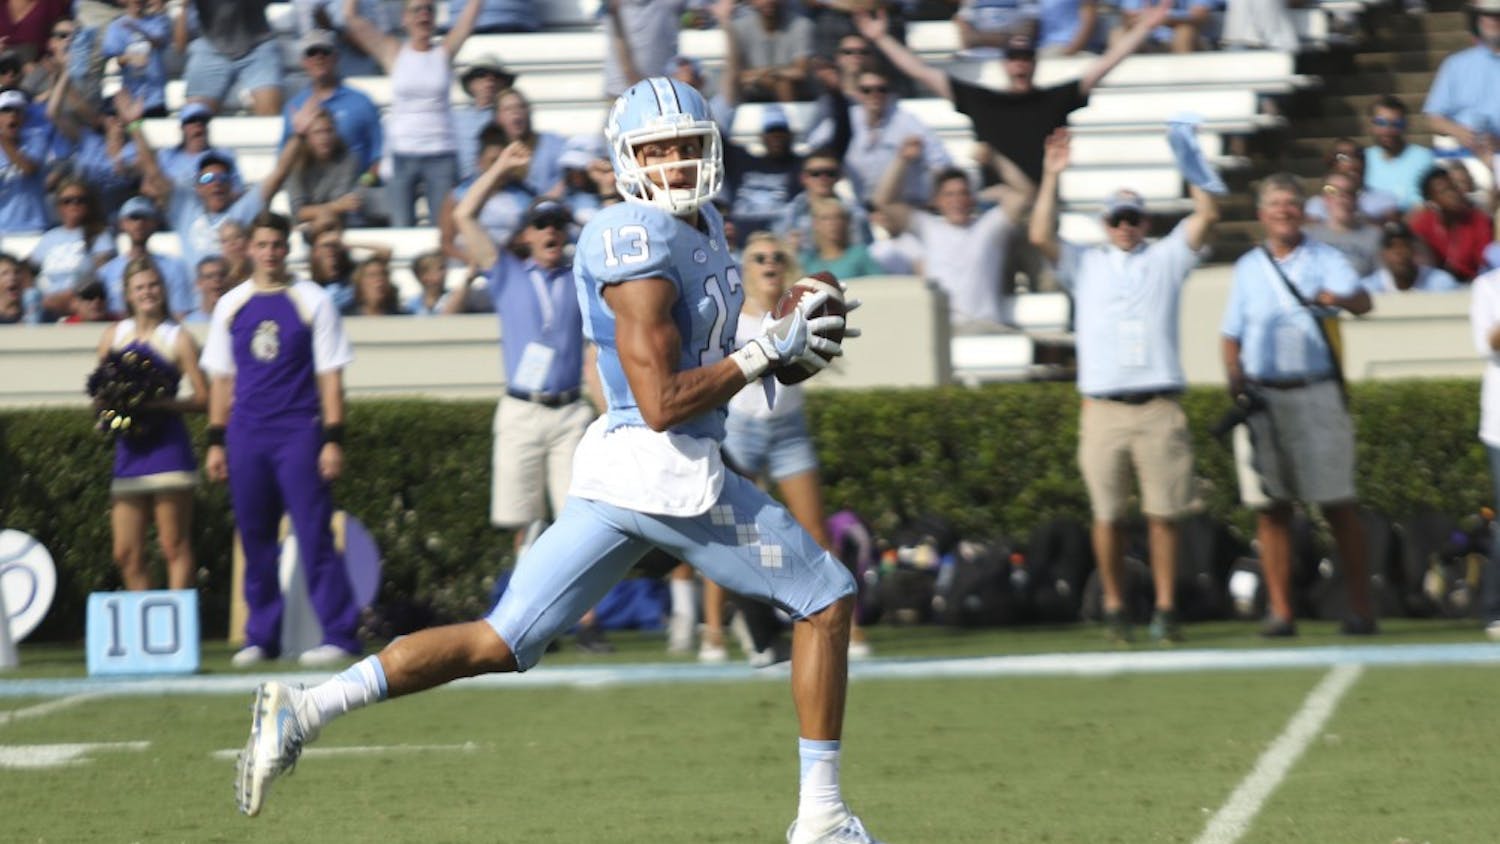 UNC receiver Mack Hollins runs into the end zone for a touchdown against James Madison on Saturday.